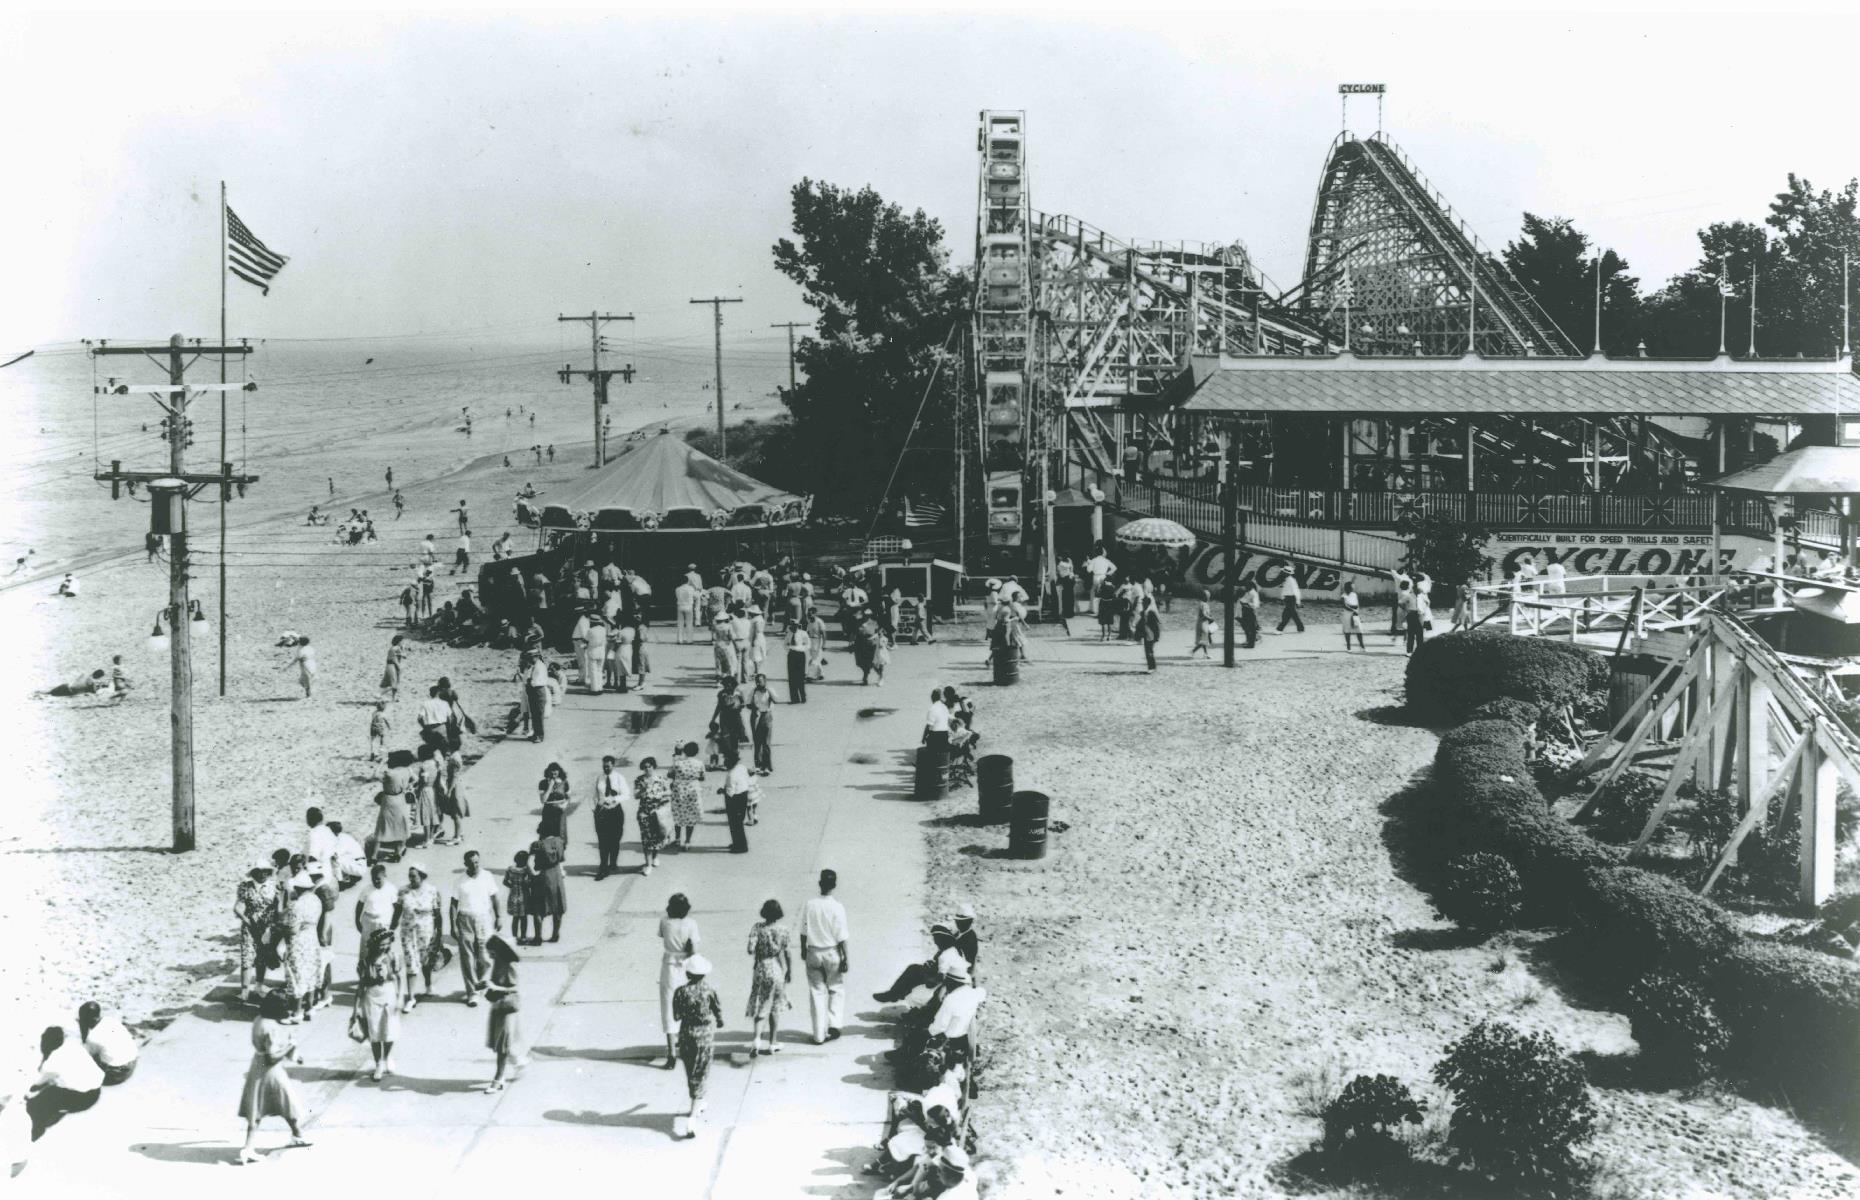 <p>Cedar Point is one of the oldest theme parks in America and has been welcoming thrill-seekers through its gates for 150 years. The first roller coaster Switchback Railway debuted here in 1892, a couple of decades after the park opened. As you can see from this shot taken in the 1920s, it quickly became a busy and popular destination as more and more rides and attractions were added. <a href="https://www.loveexploring.com/galleries/92839/stunning-historic-images-of-theme-parks-in-full-swing?page=1">Check out these stunning historic images of theme parks in full swing</a>.</p>